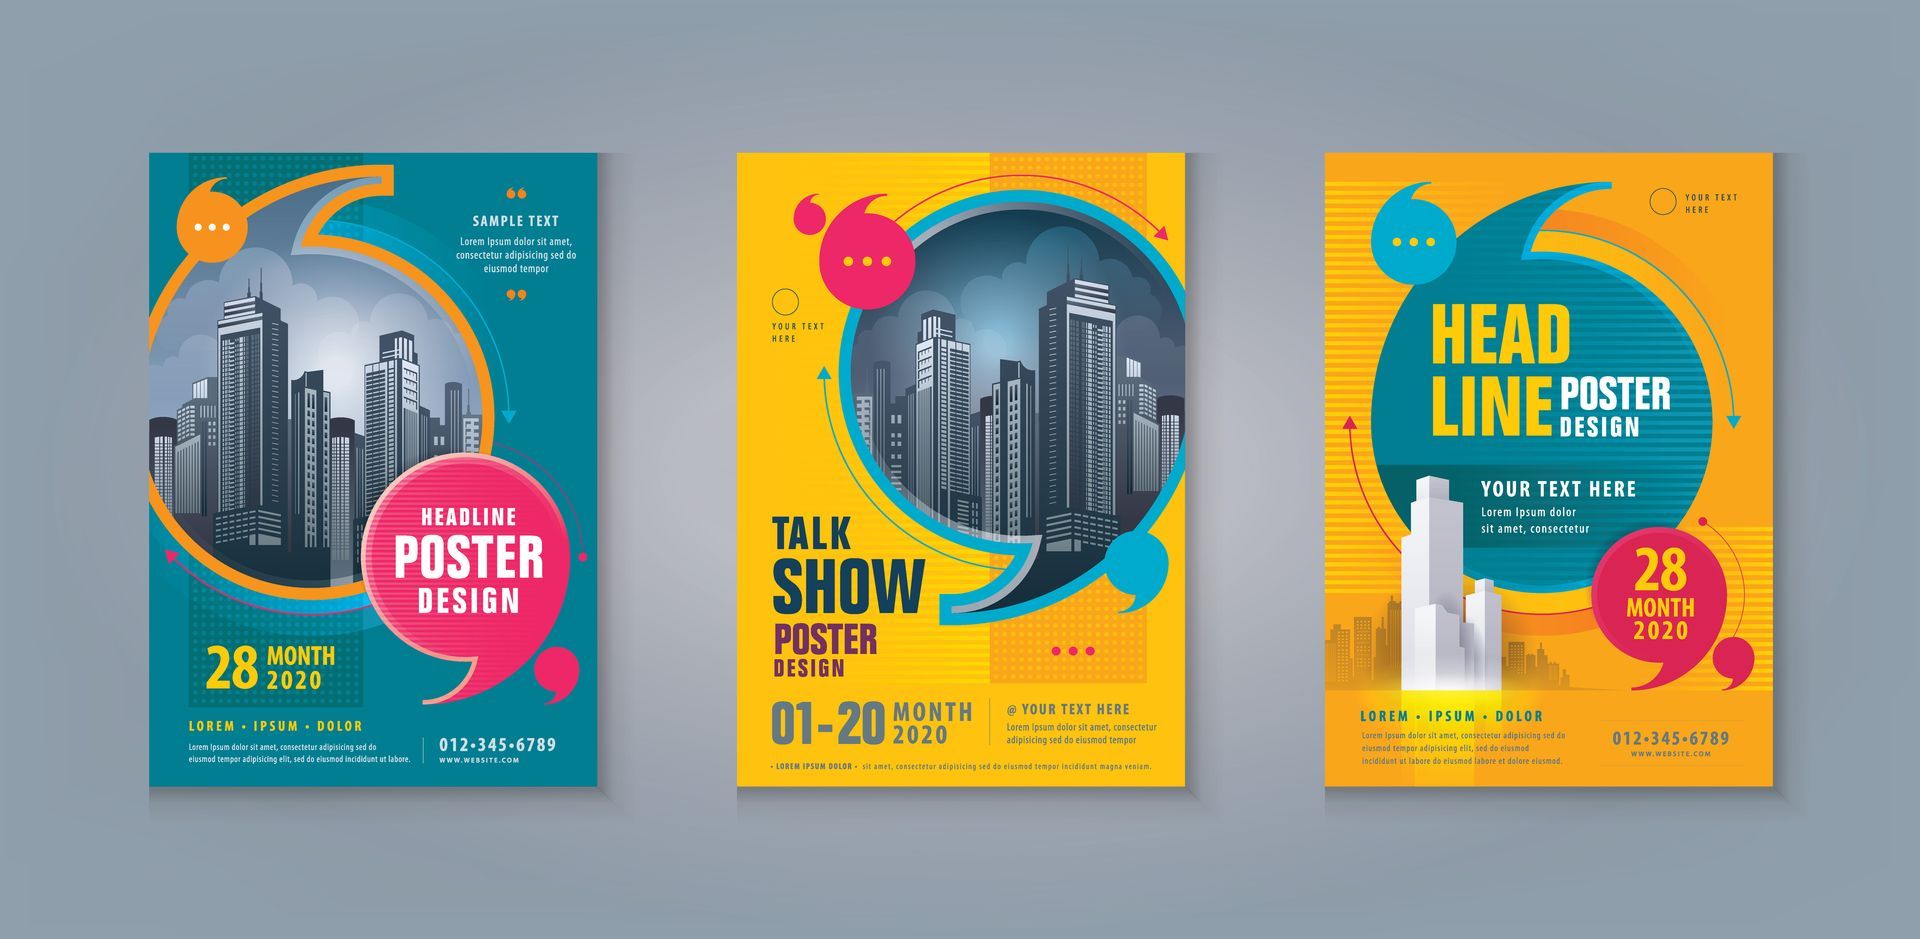 Dedham Custom Posters For Conferences & Trade Shows